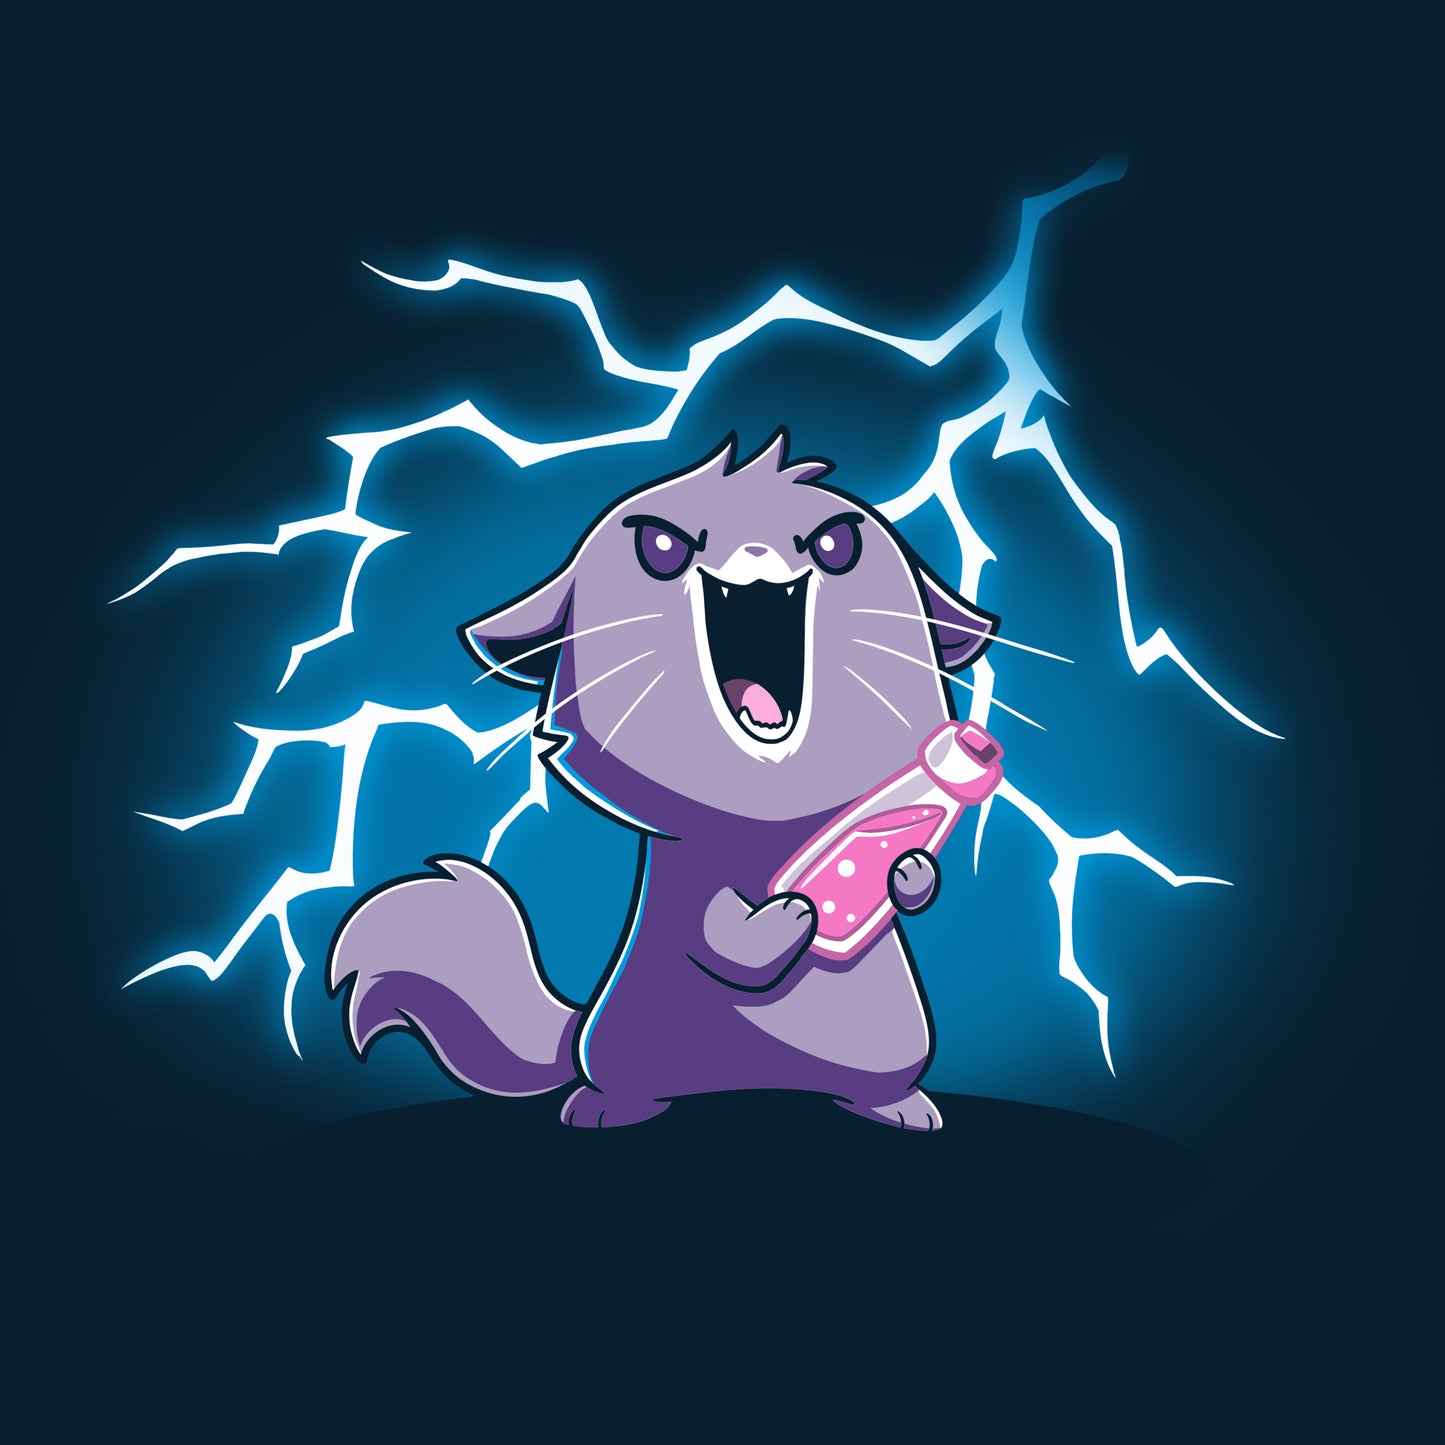 An officially licensed Disney character, Evil Yzma, as a purple cat with a lightning bolt in its mouth.